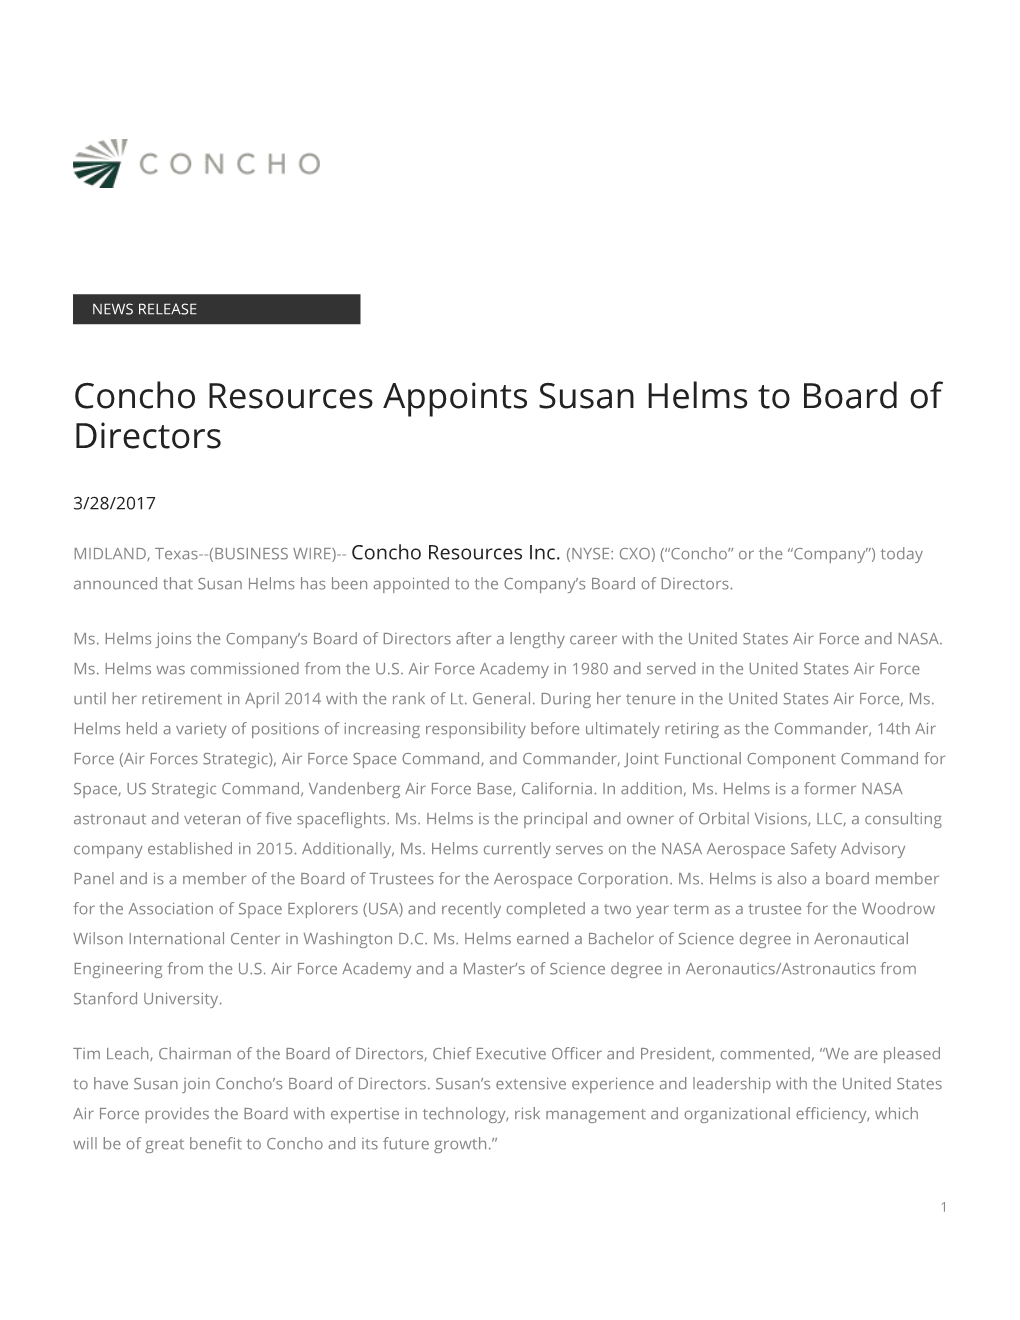 Concho Resources Appoints Susan Helms to Board of Directors